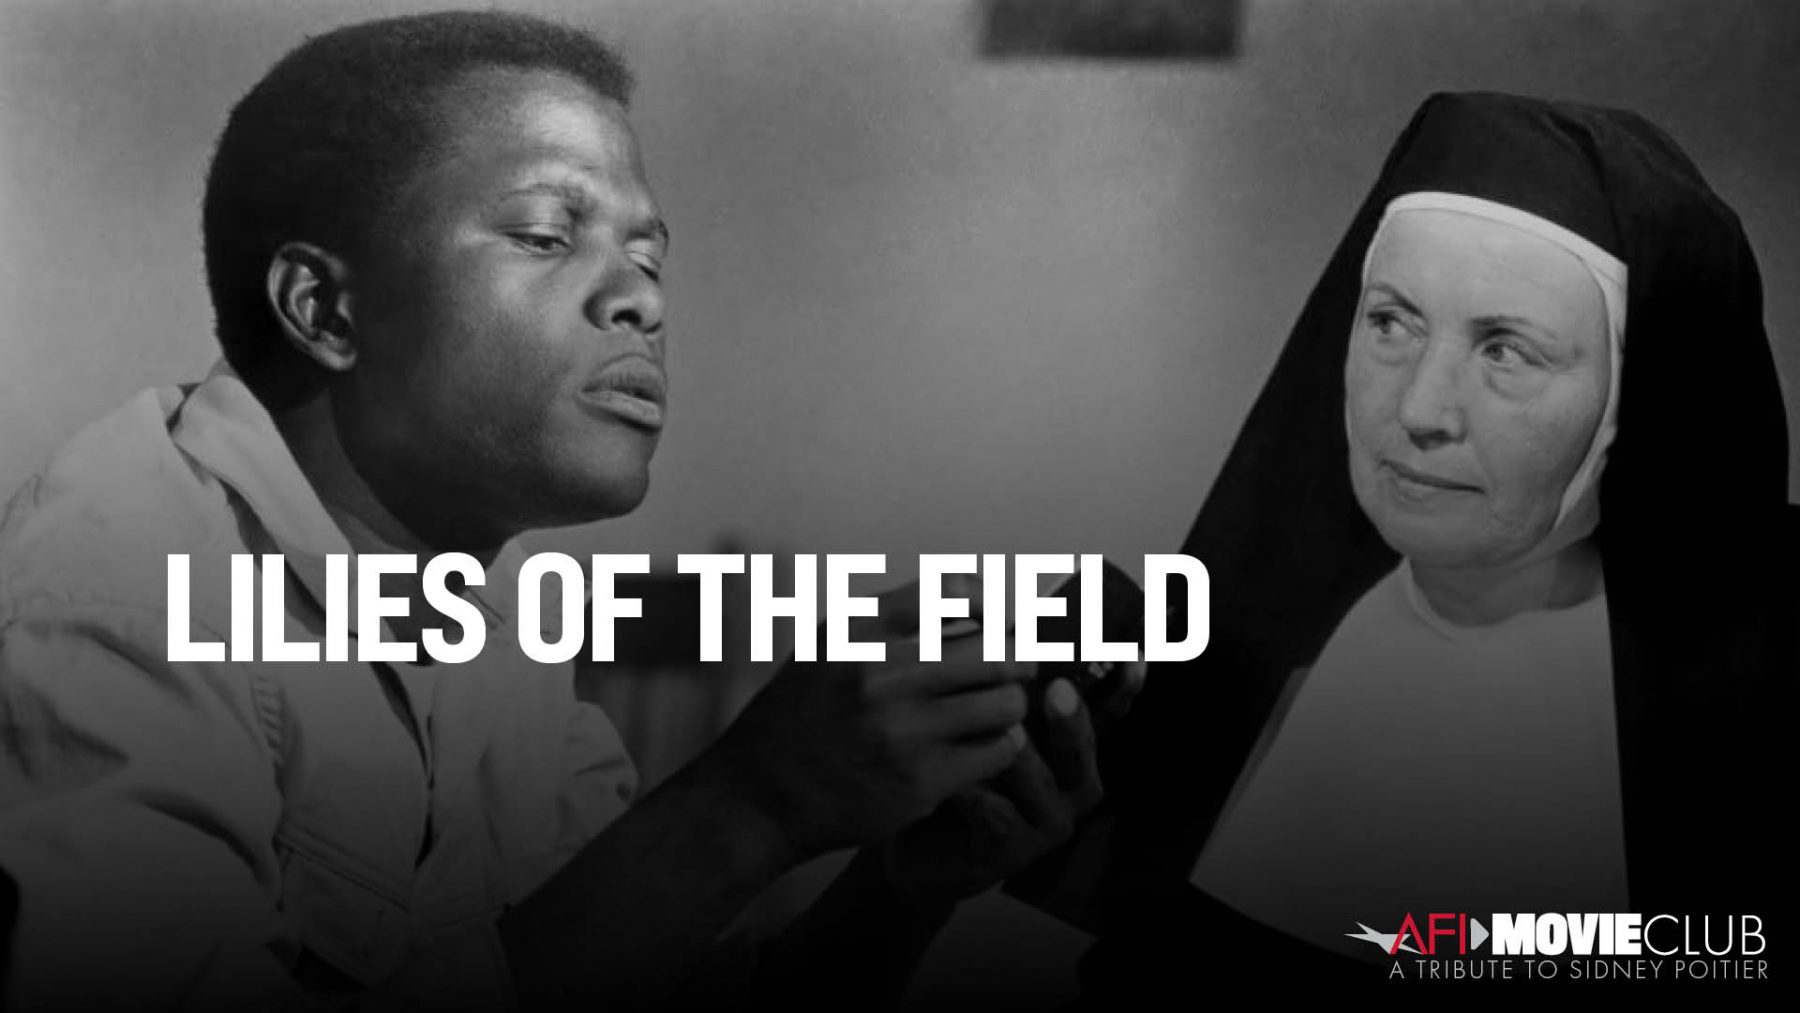 Afi Movie Club Tribute To Sidney Poitier Lilies Of The Field American Film Institute 